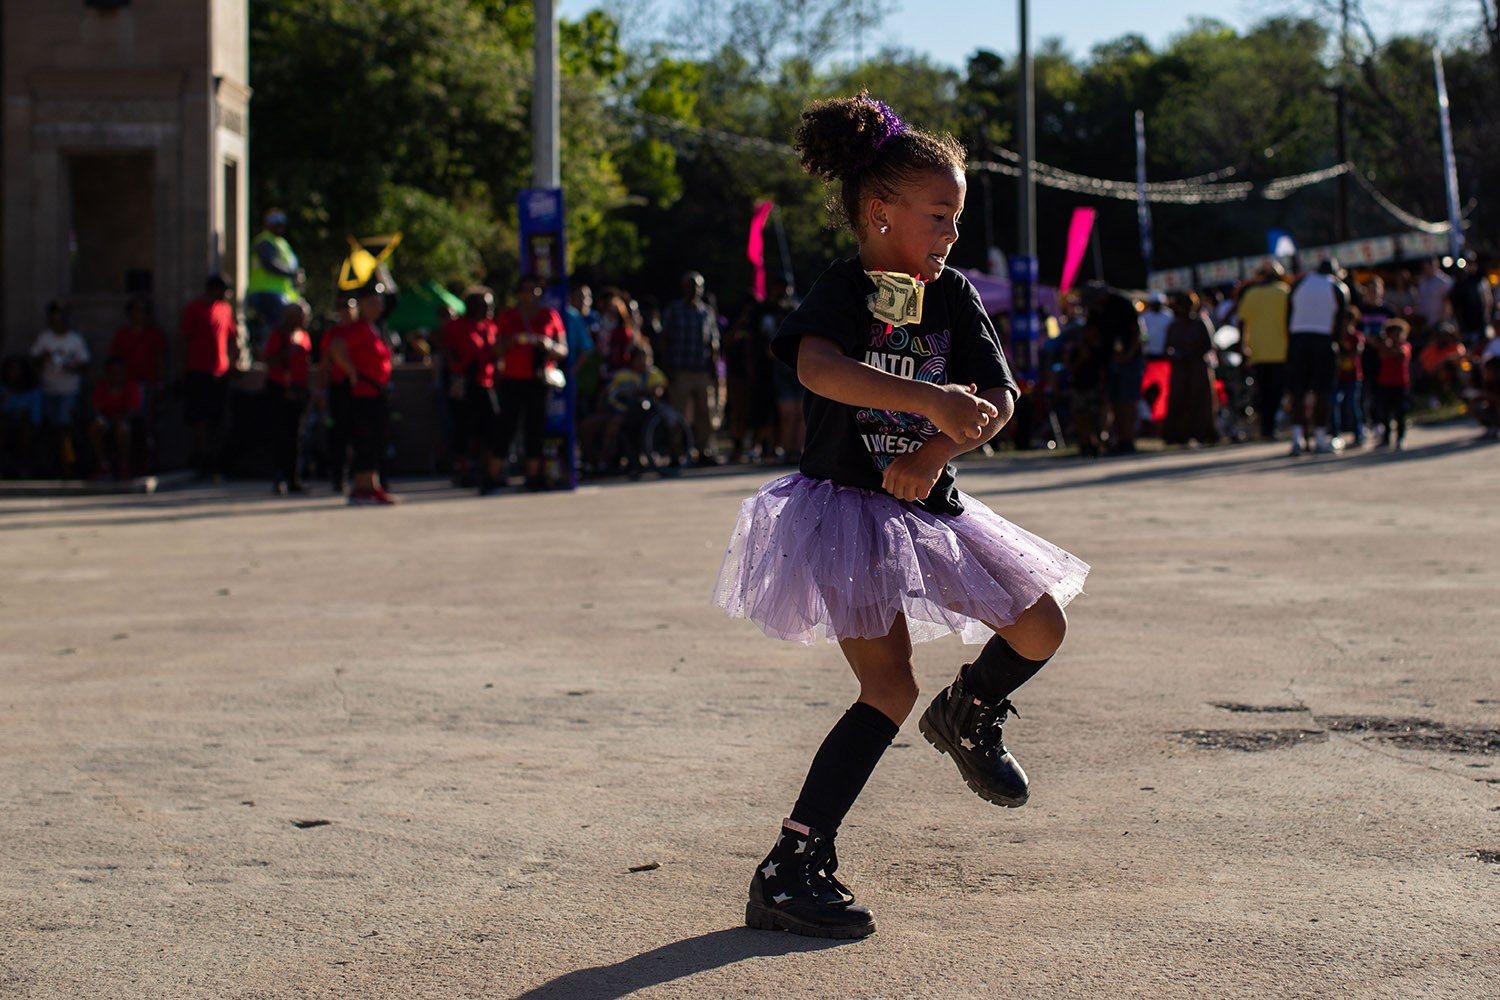 Jade Freeman dances to a jazz band performing at A Taste of New Orleans, the 35th edition of the Fiesta event, on Saturday evening, April 2, 2022, at Sunken Garden Theater in San Antonio, Texas. Photo by Kaylee Greenlee Beal | Heron contributor